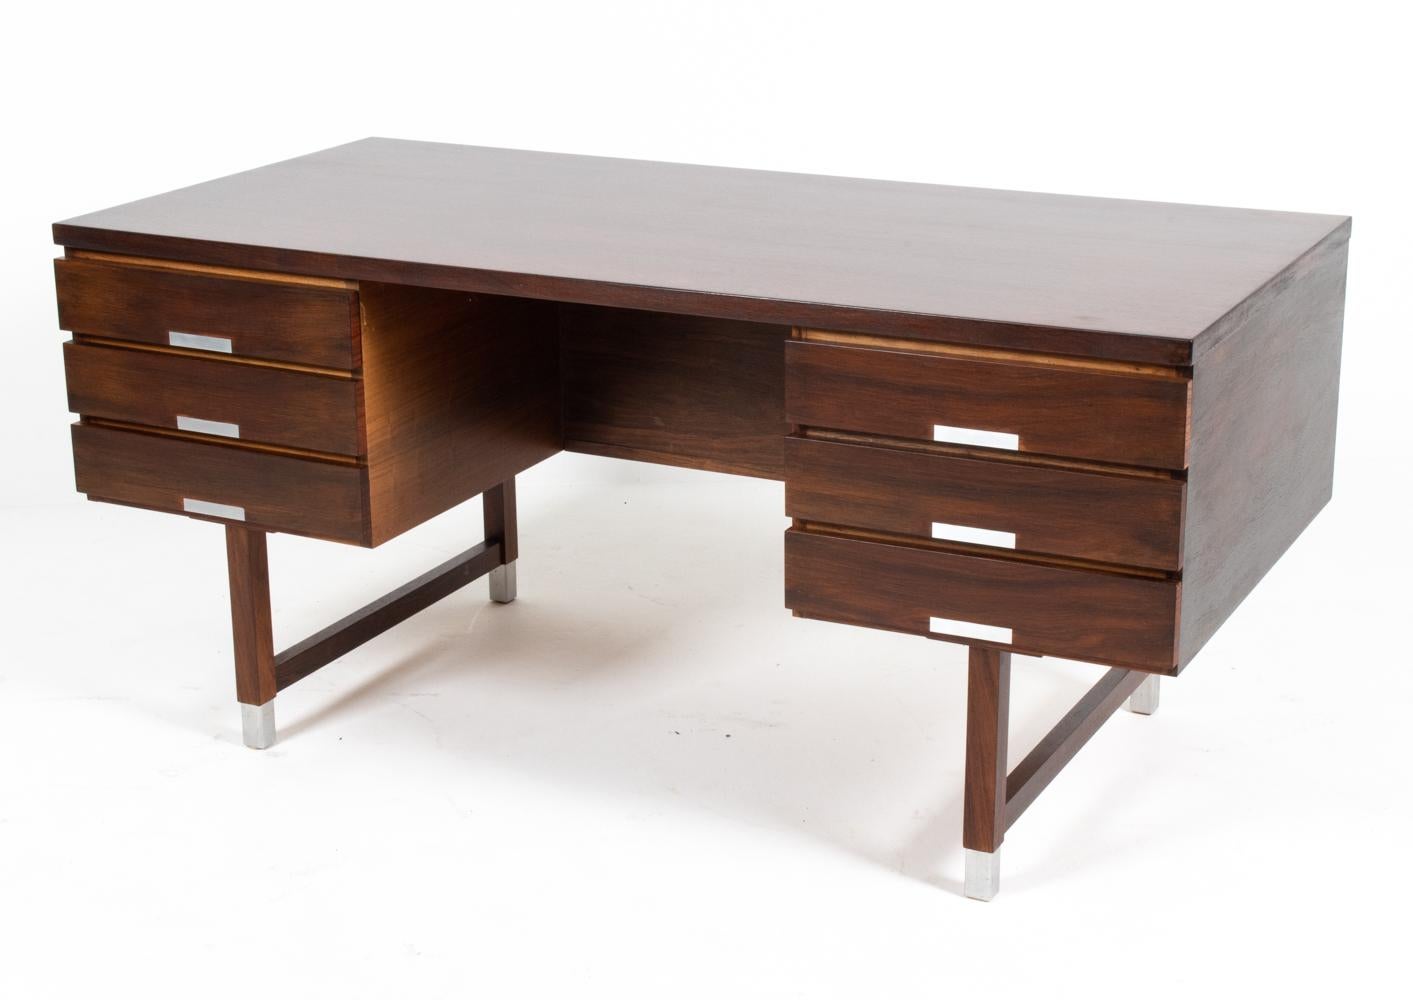 Sleek, elegant, and powerful, the EP 401 desk by Kai Kristiansen is a timeless piece of Danish Mid-Century design. The design features a simple silhouette, with solid secondary woods providing a sturdy foundation for ample storage (six drawers and